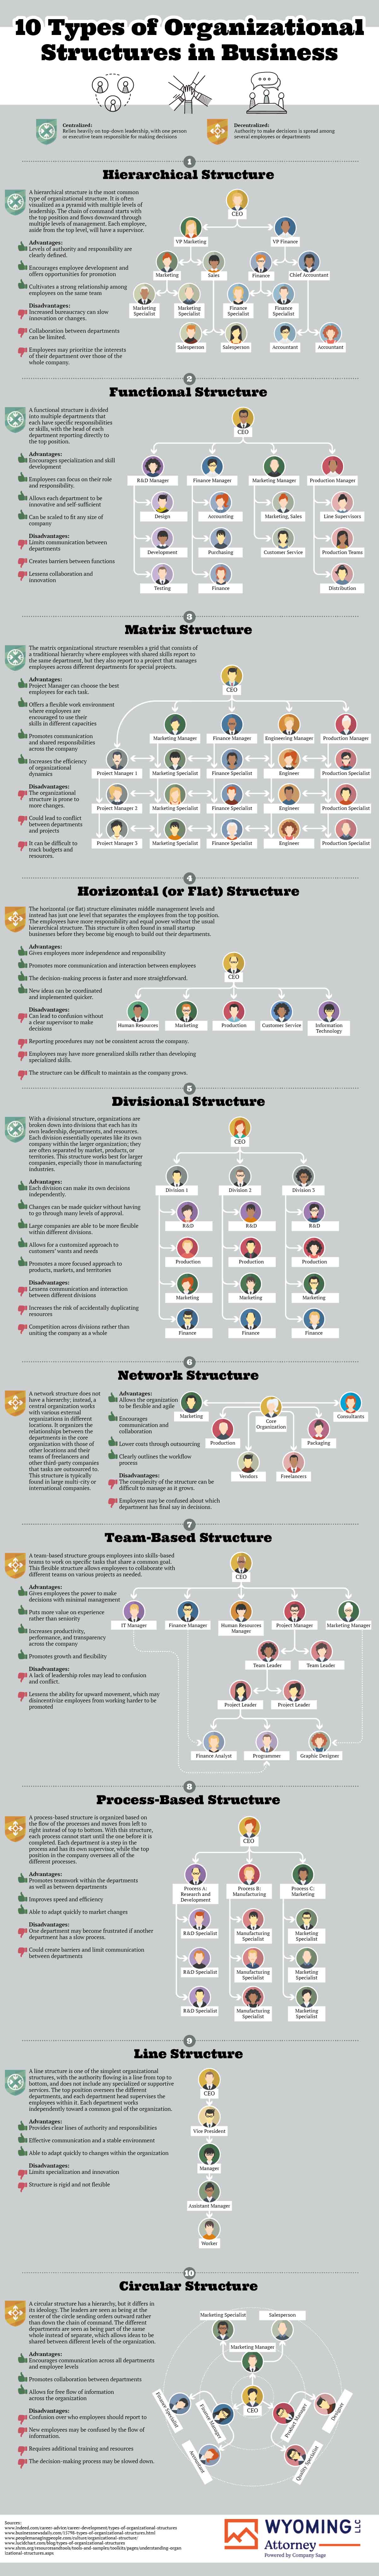 10 Types of Organizational Structures in Business